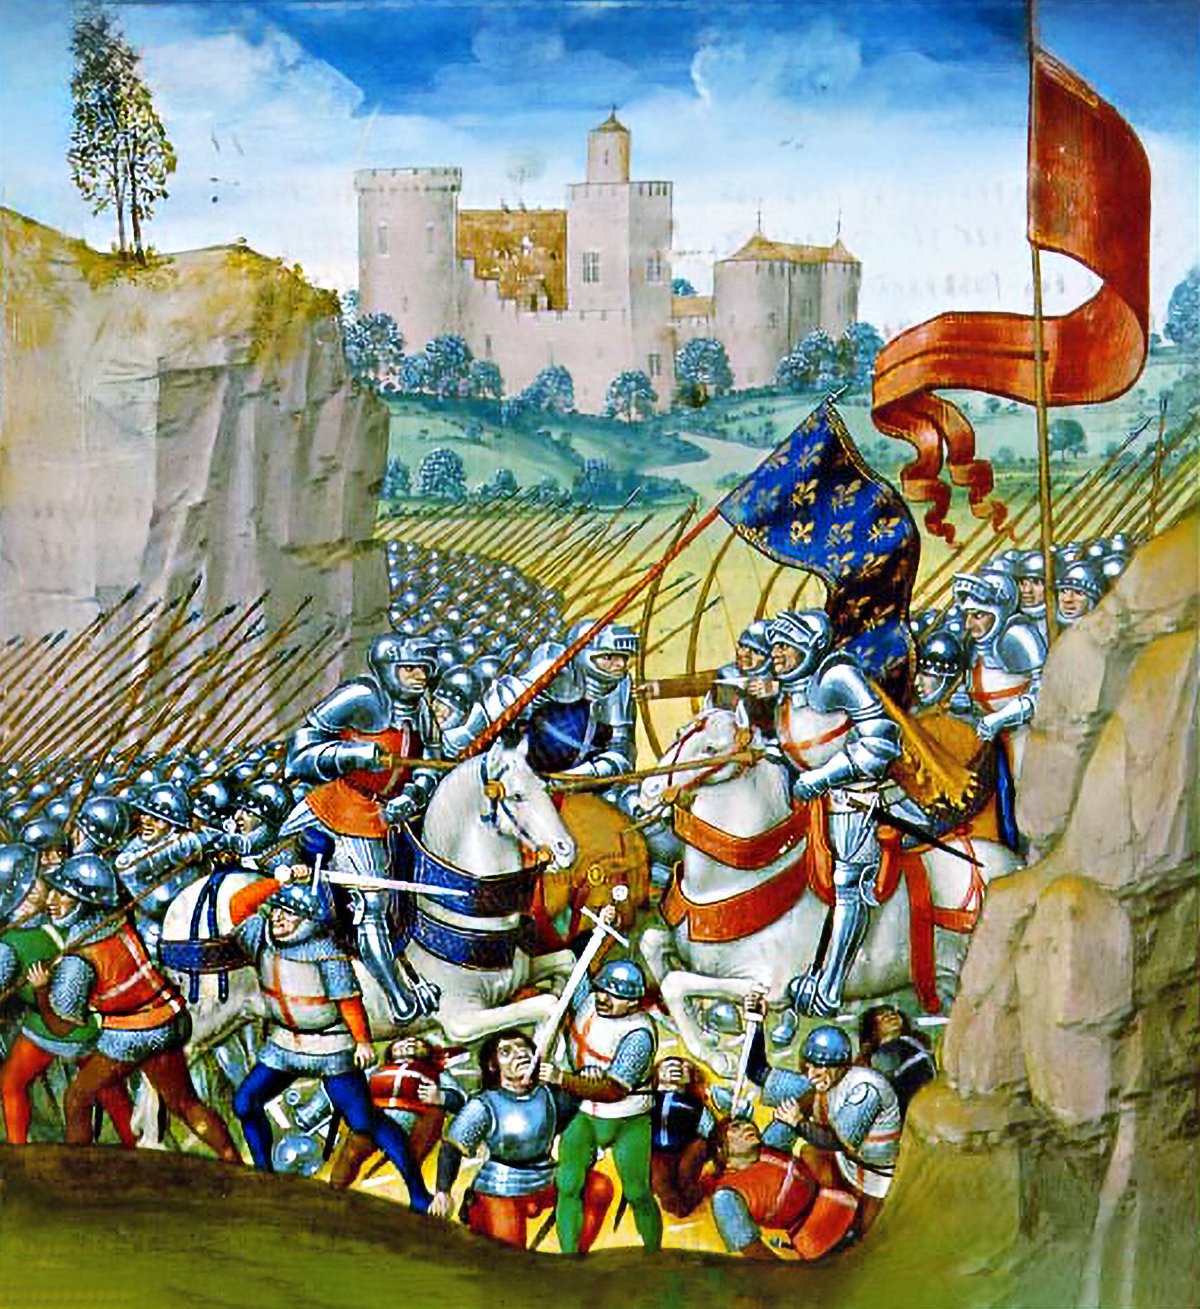  Colorful illustration from Enguerrand de Monstrelet's 'Chronique de France' depicting the Battle of Agincourt. Armored knights clash in the foreground, with the French forces bearing the royal standard, adorned with fleur-de-lis, on the left. Fallen soldiers lie on the ground amidst the fighting. In the background, a medieval castle stands atop a hill, overlooking the battlefield.